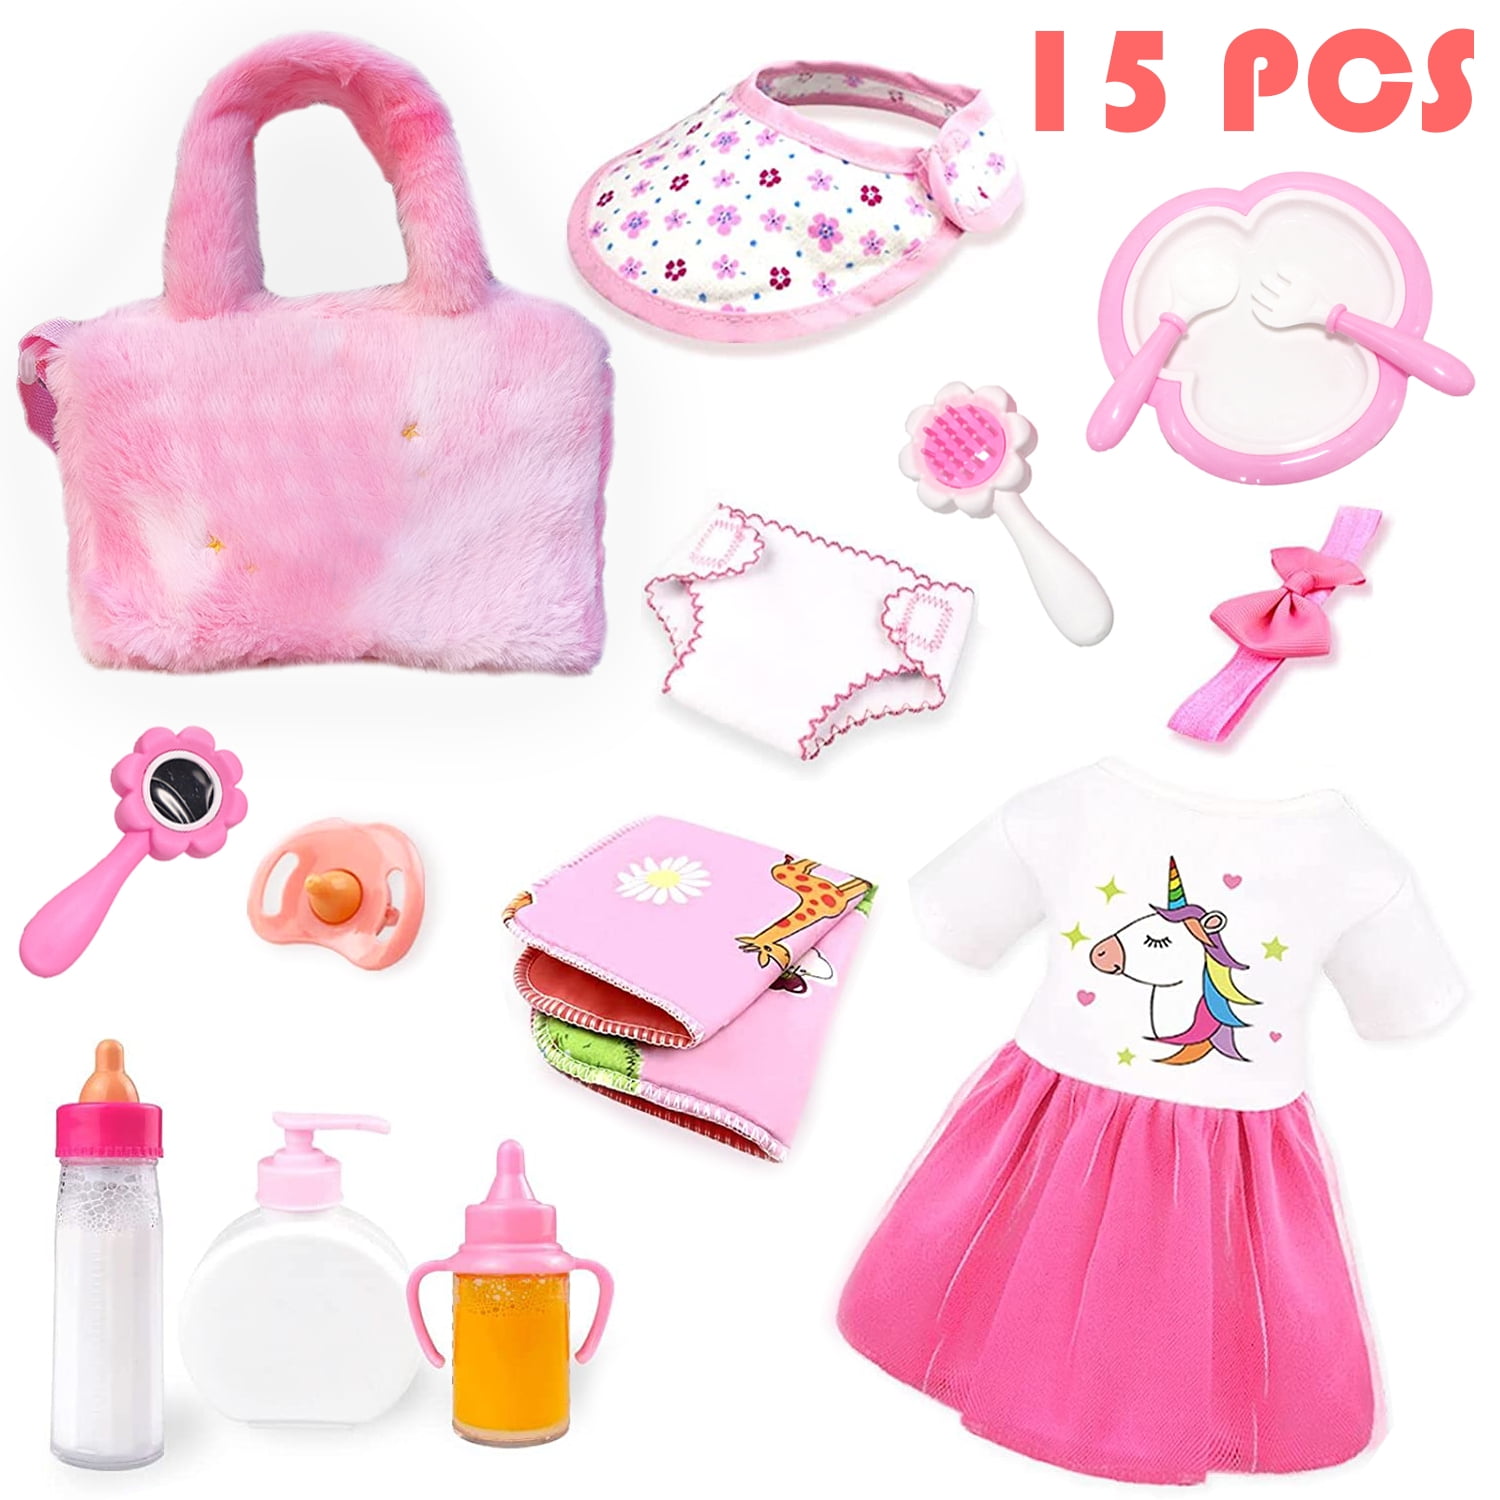 15Pcs Baby Doll Accessories, Baby Doll Feeding and Caring Set, Baby Pretend  Play Set Fit 14-16 inch Doll and 18 inch Doll, Toys for Kids Girls 3-6